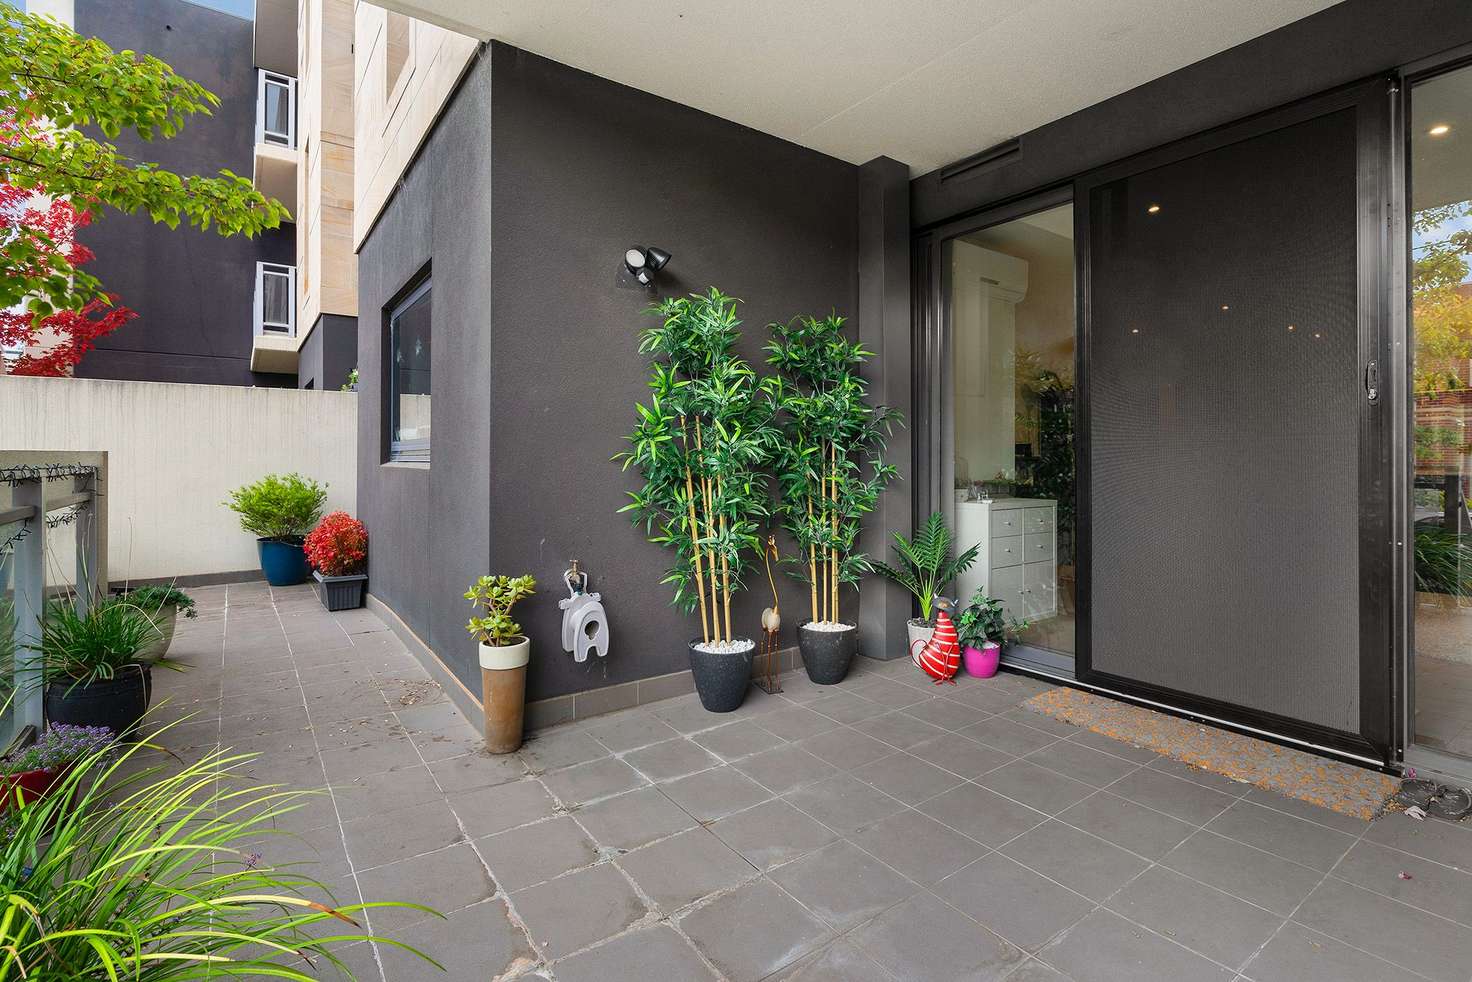 Main view of Homely apartment listing, 10/2-4 William Street, Murrumbeena VIC 3163